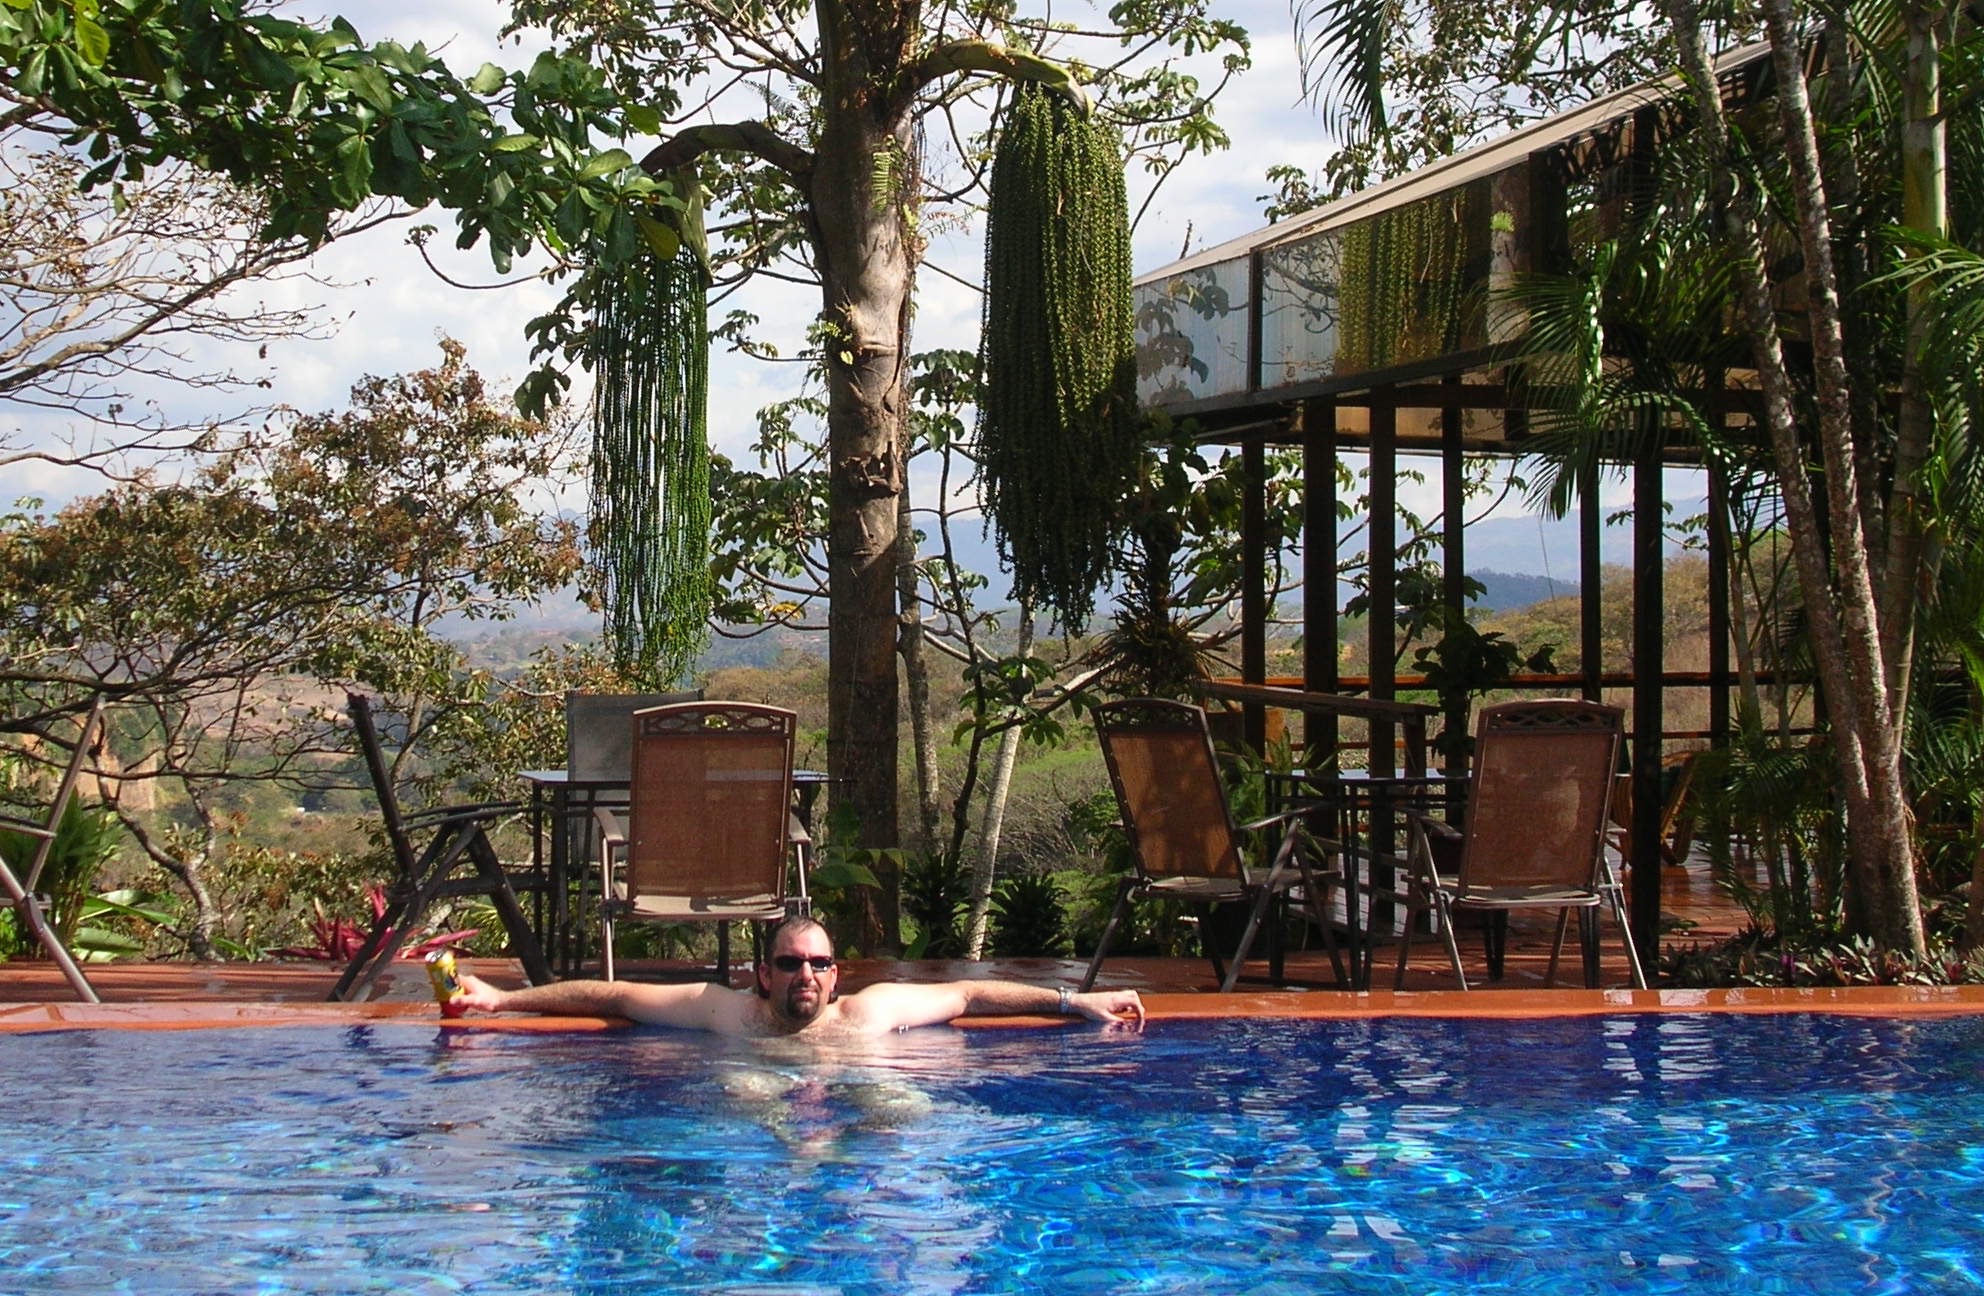 Soaking up the Costa Rican lifestyle. Photo by Marla Norman.